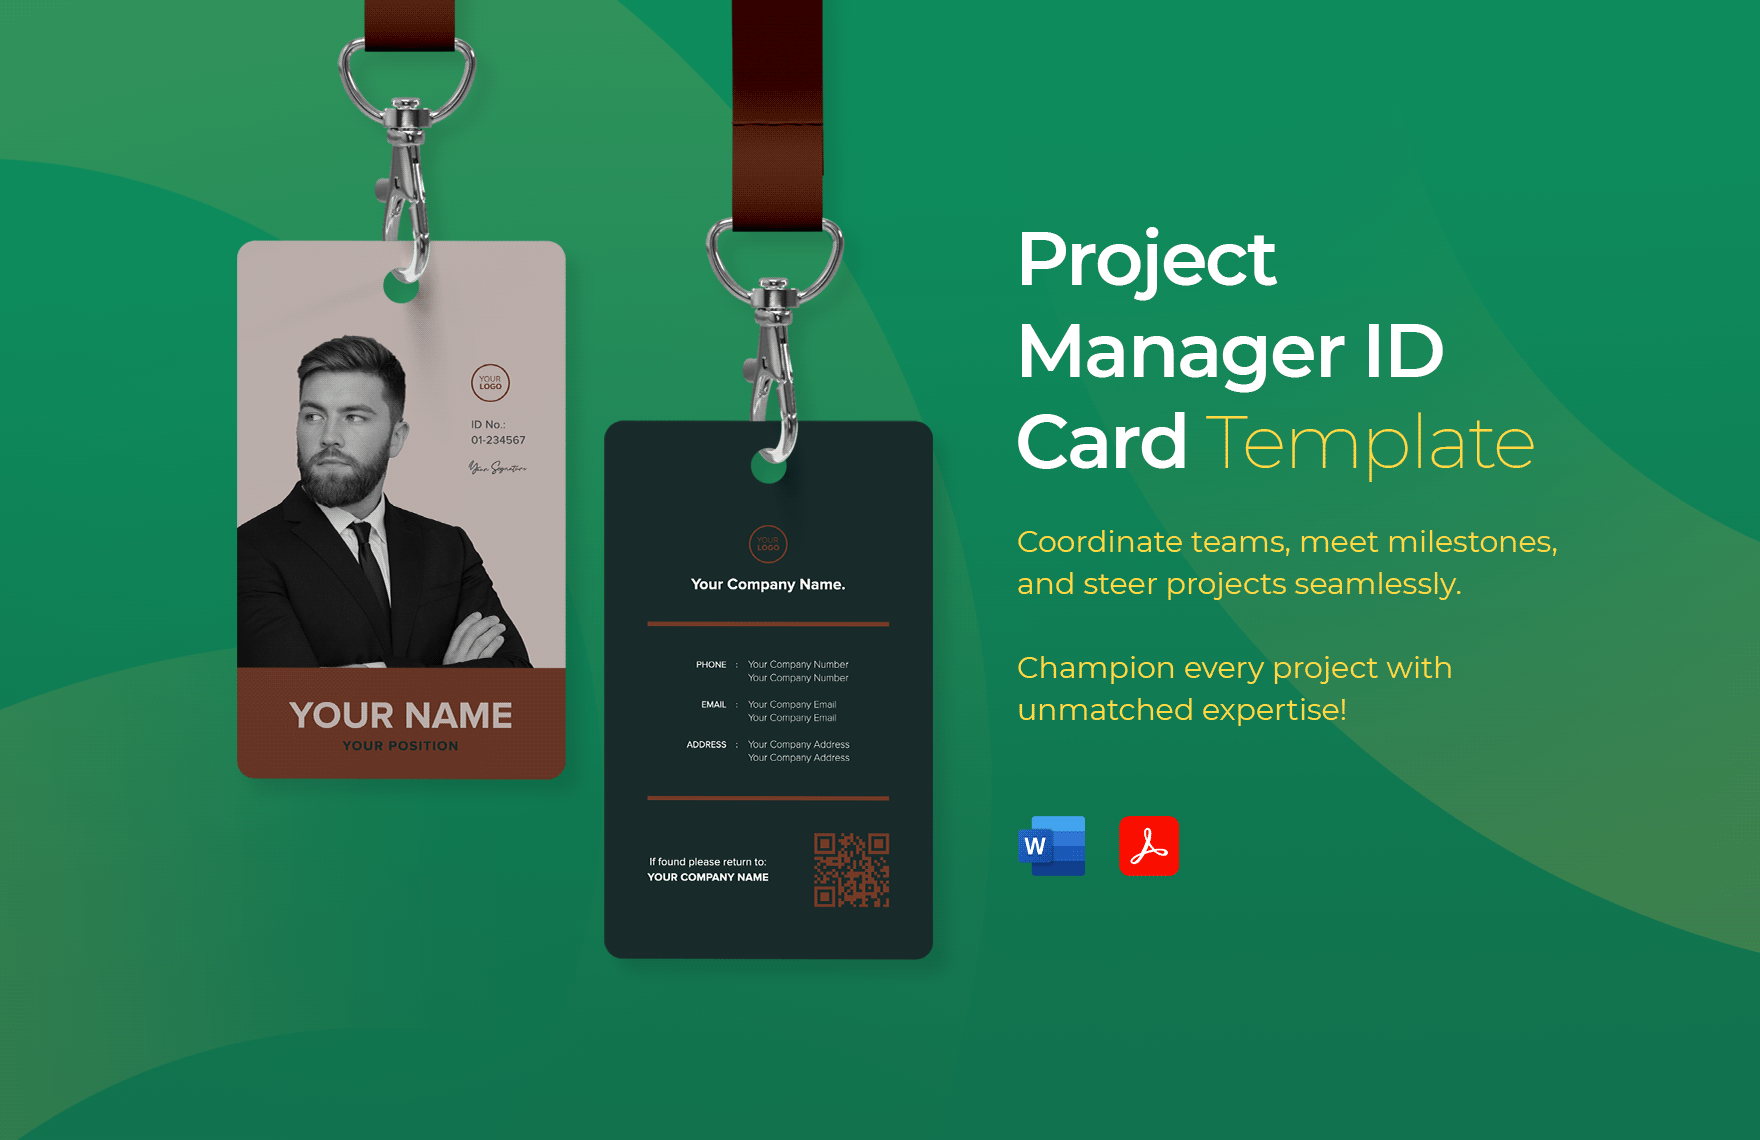 brand-manager-id-card-template-download-in-word-pdf-template